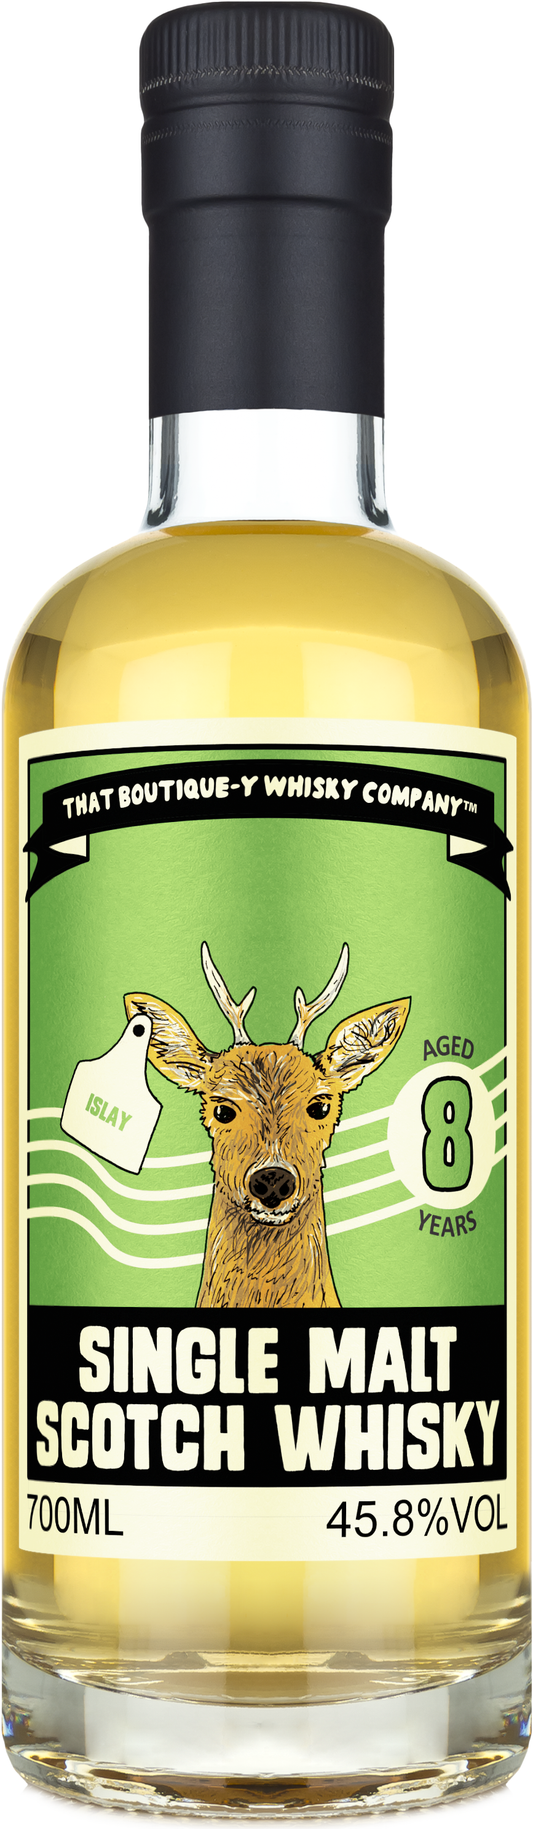 That Boutique-Y Whisky Company 8 Year Old Islay Single Malt Scotch Whisky 700ml